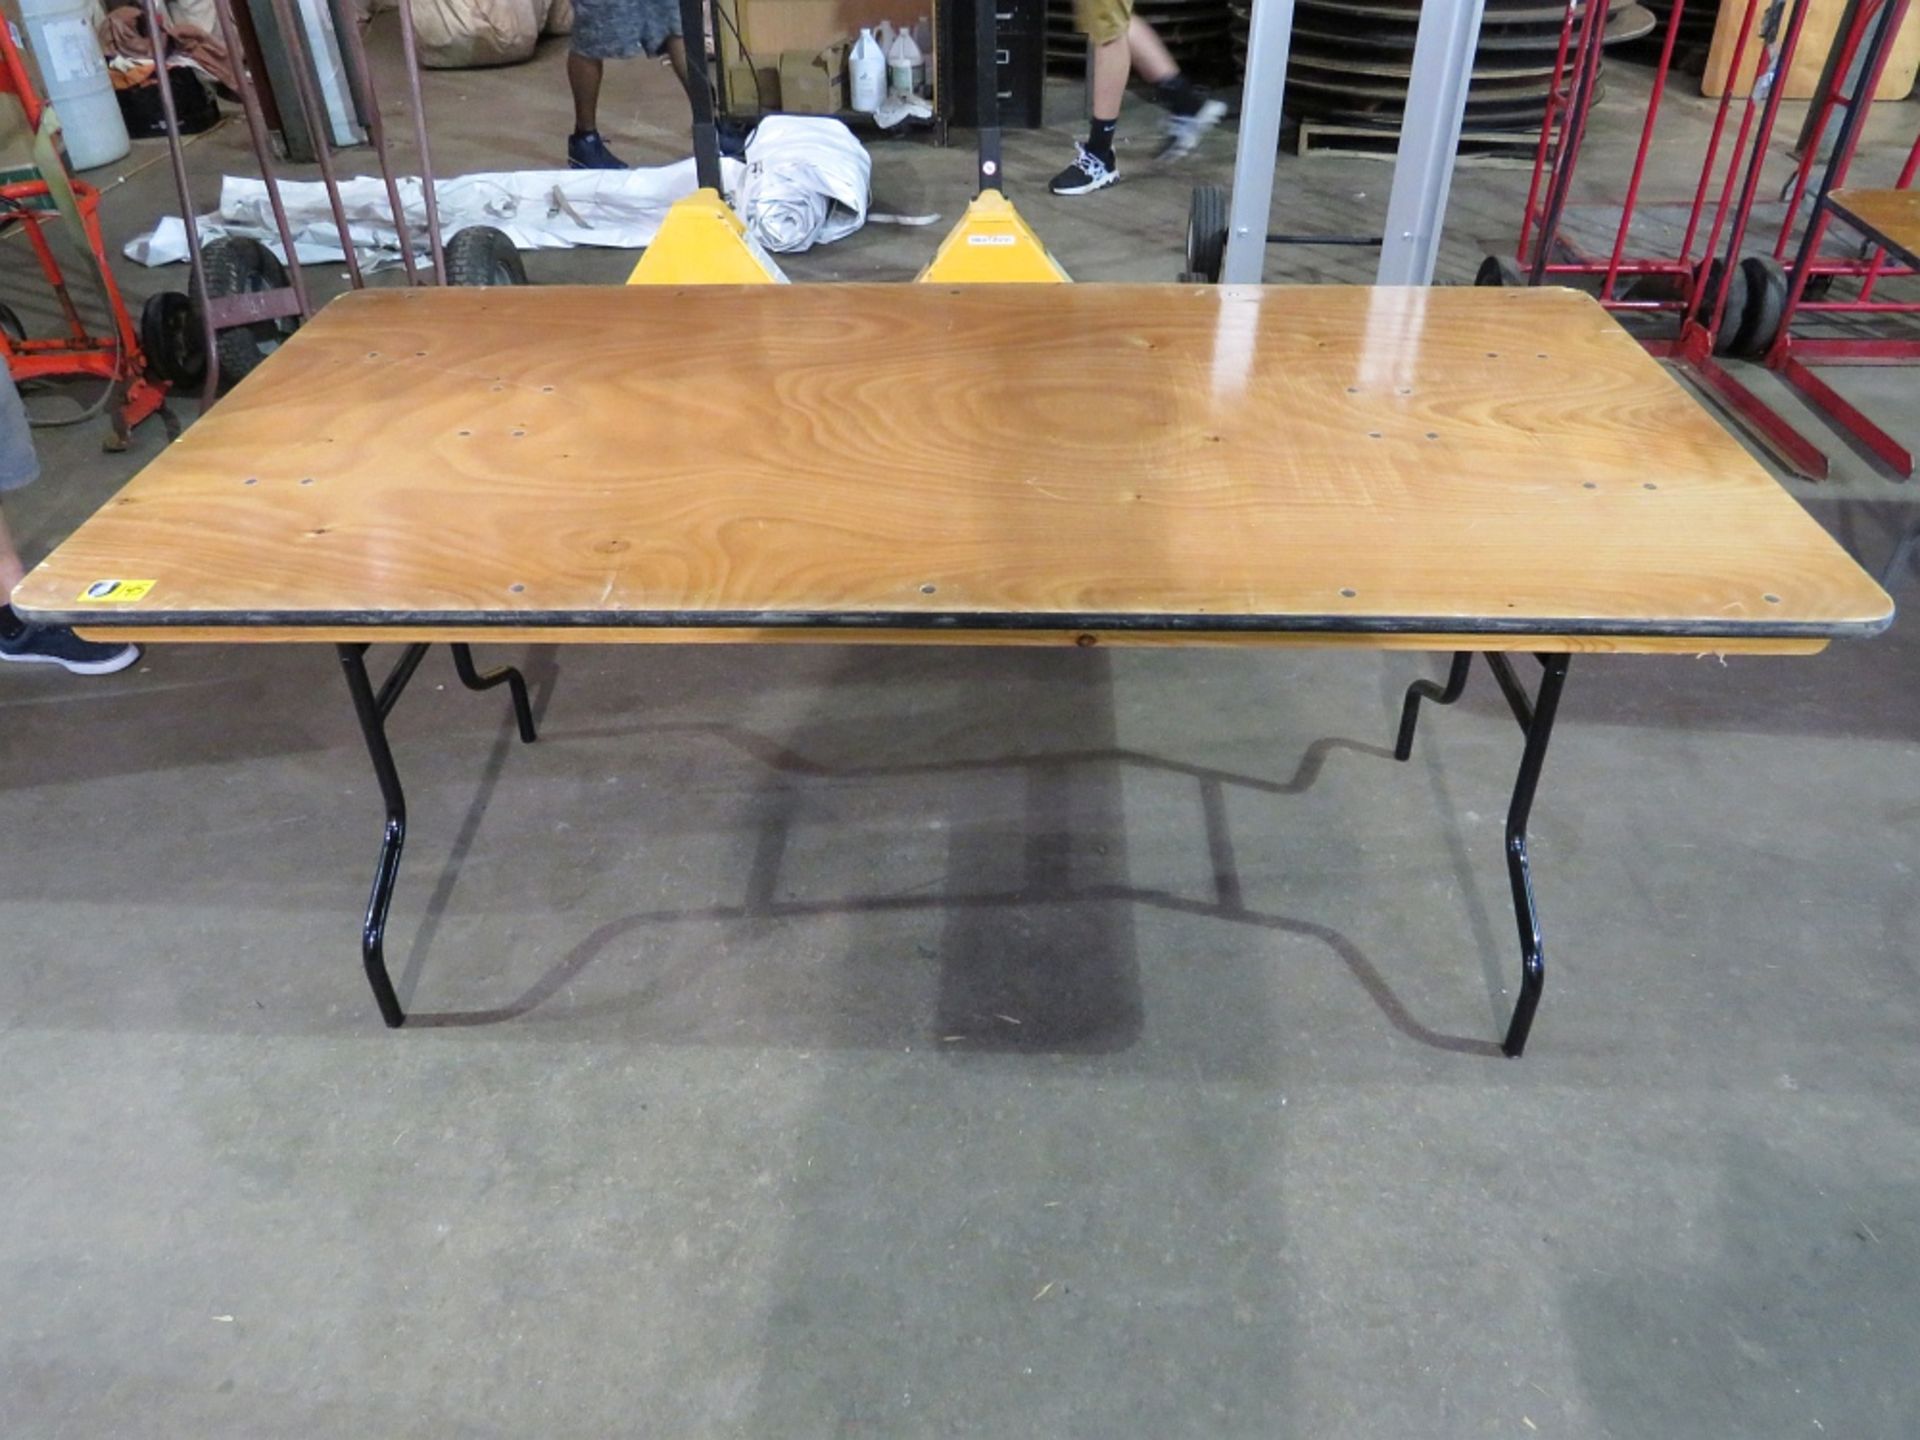 TABLE, 6' X 36"